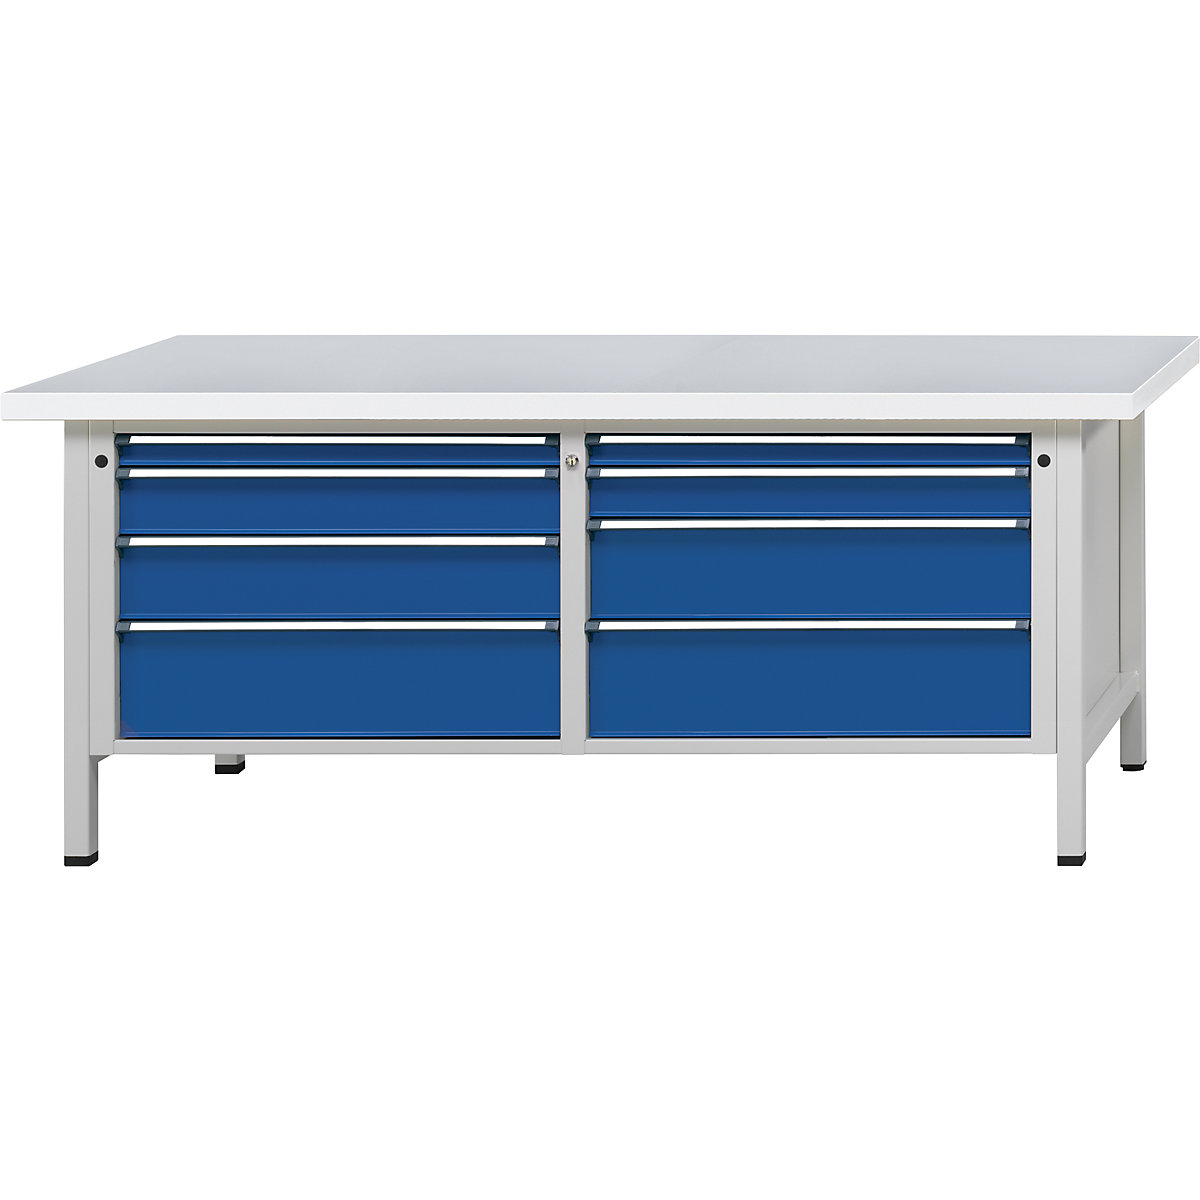 Workbenches 2000 mm wide, frame construction – ANKE, 8 drawers, universal worktop, height 840 mm-8